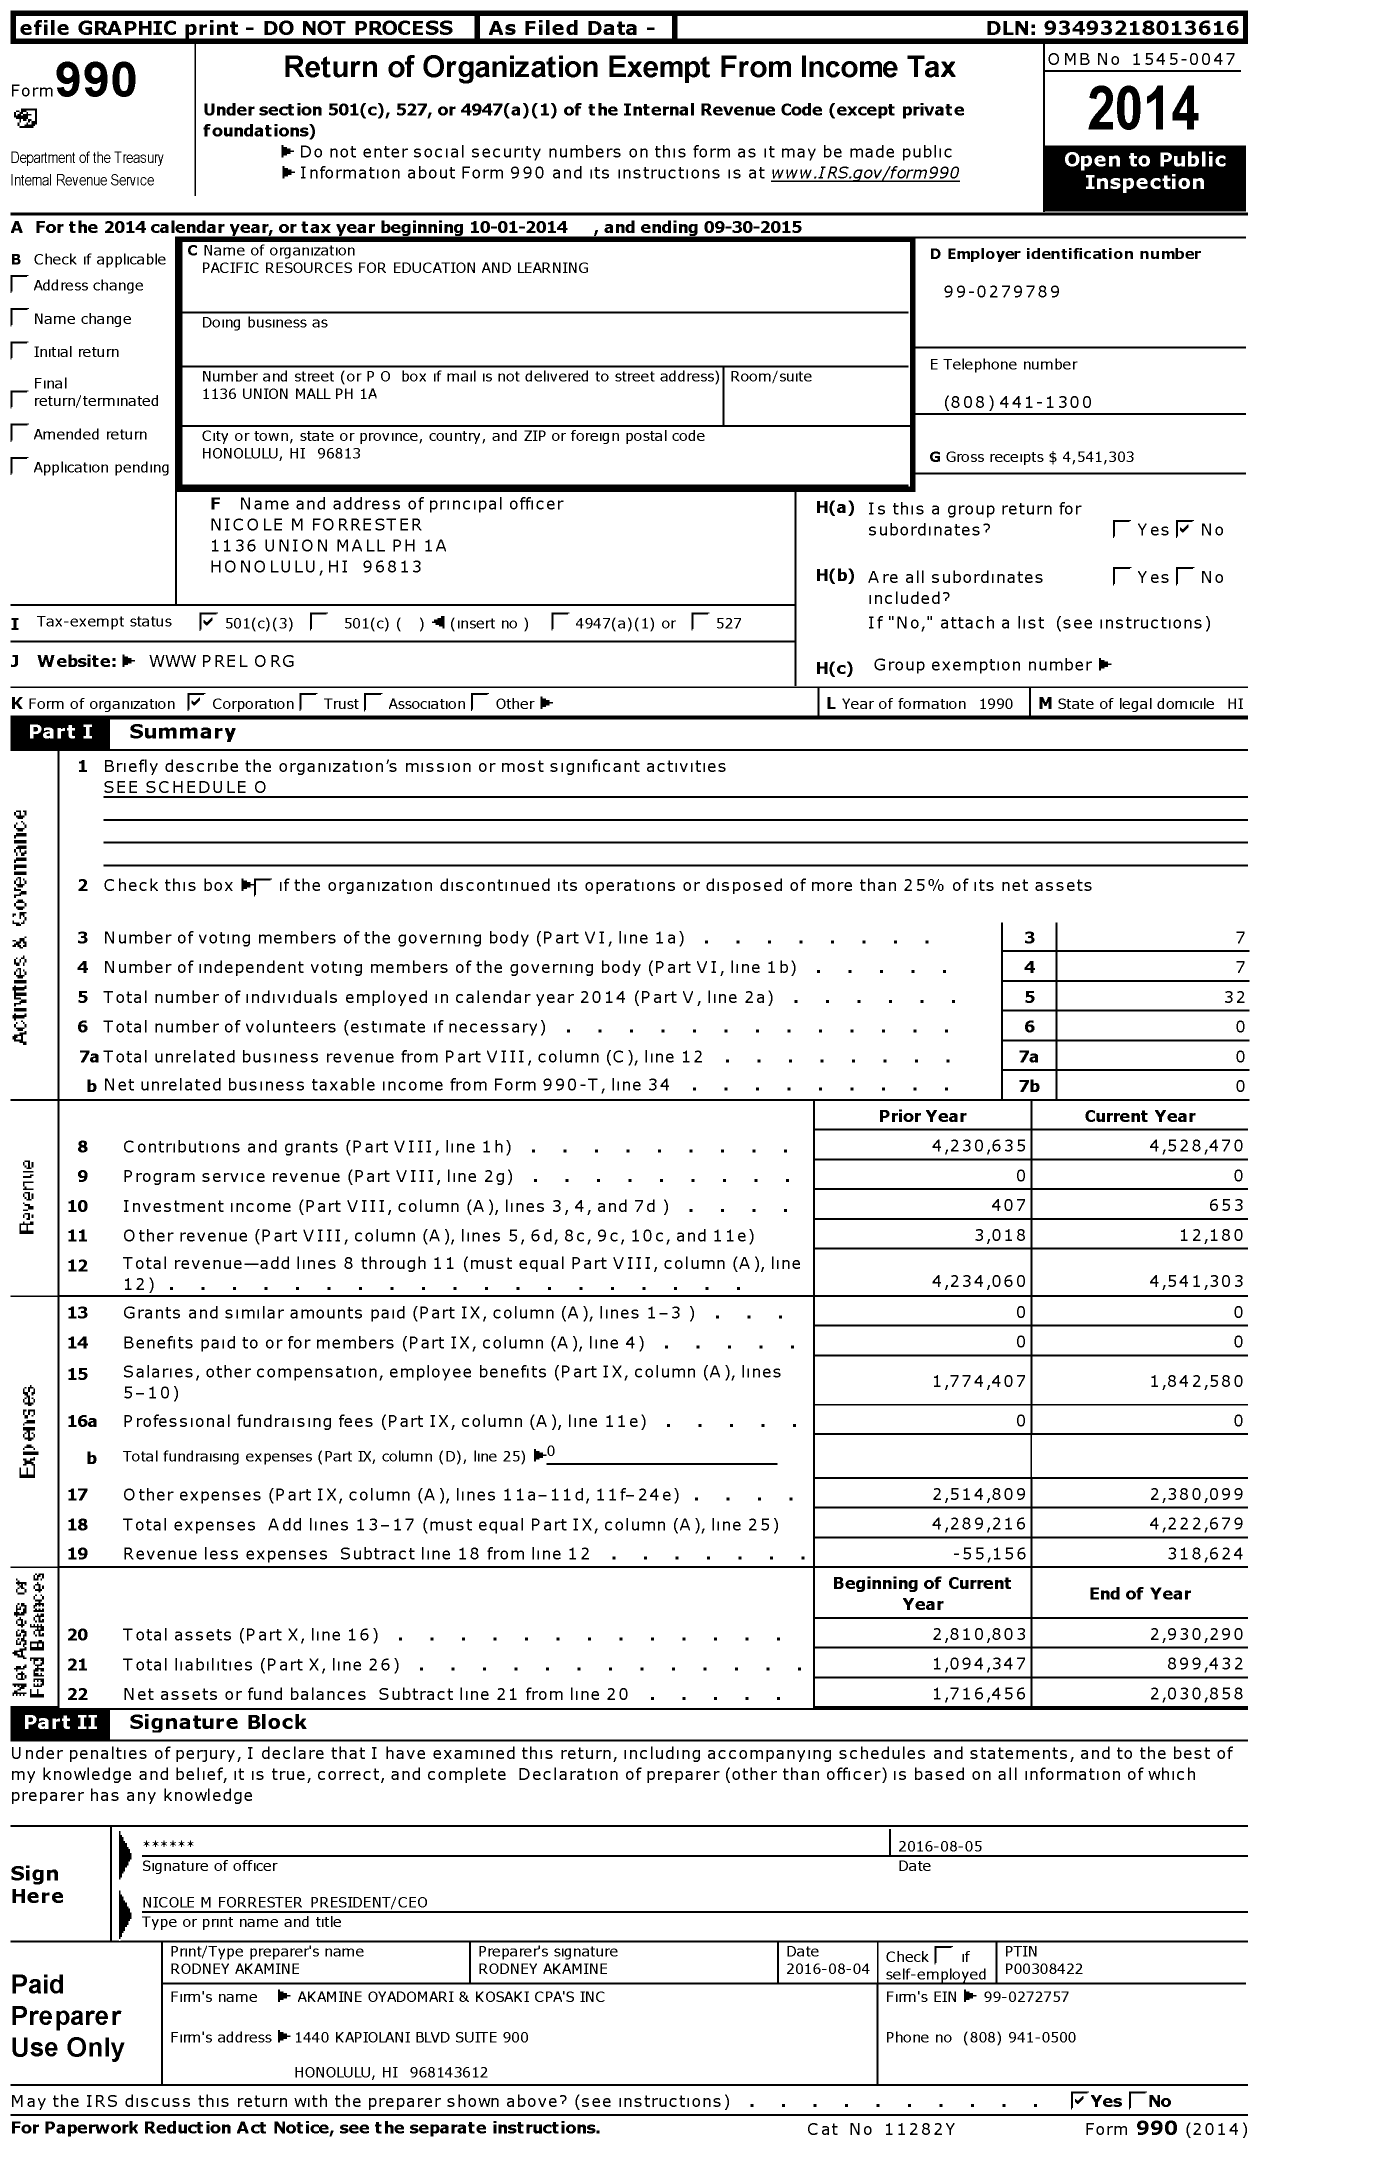 Image of first page of 2014 Form 990 for Pacific Resources for Education and Learning